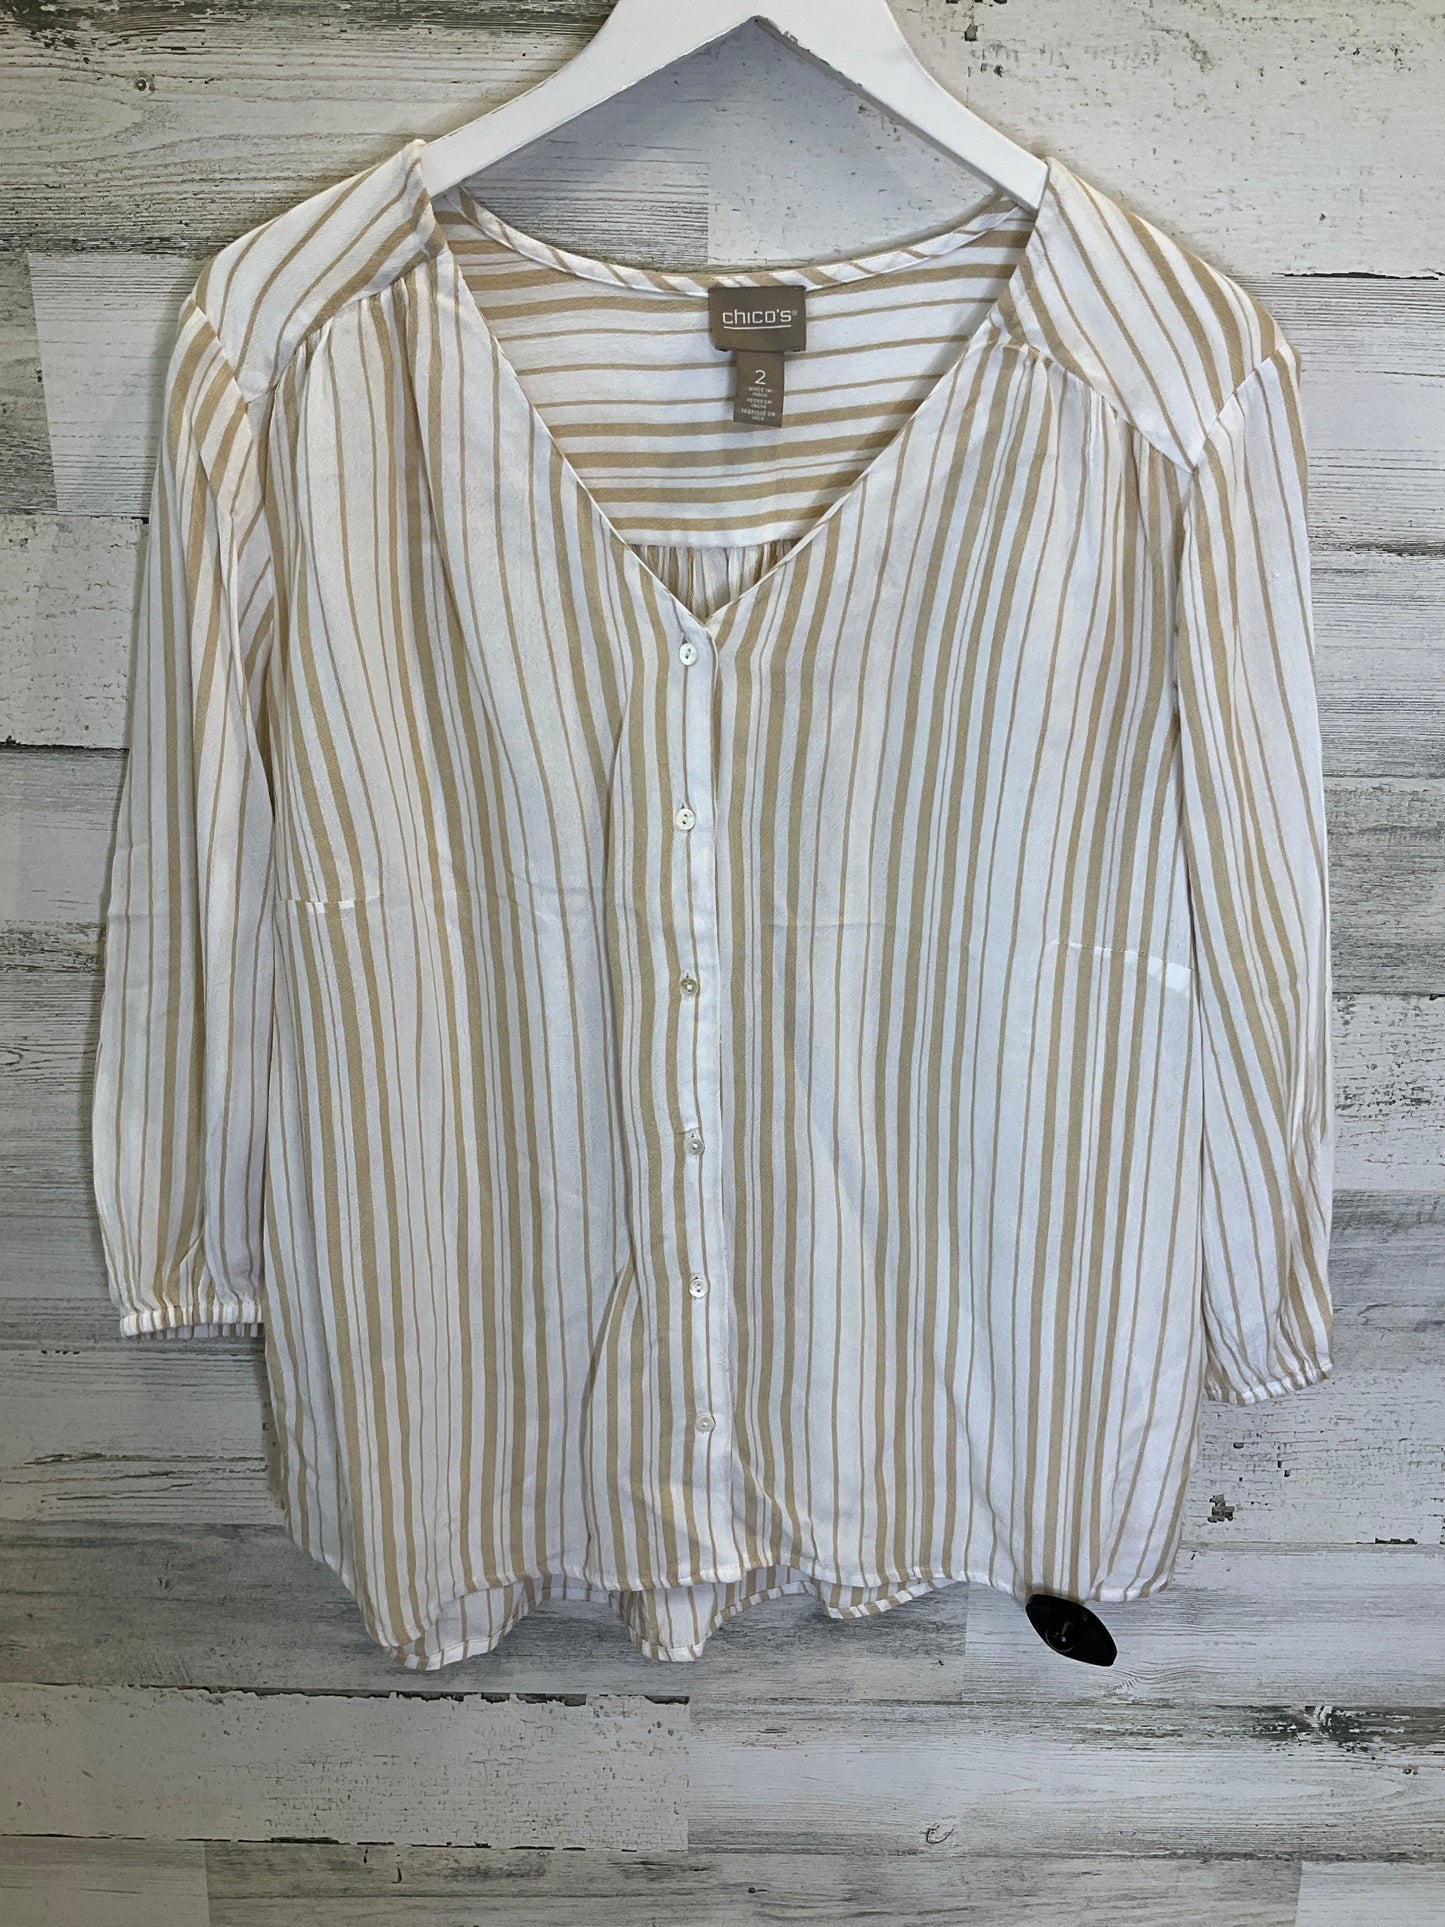 Tan & White Top Long Sleeve Chicos, Size L